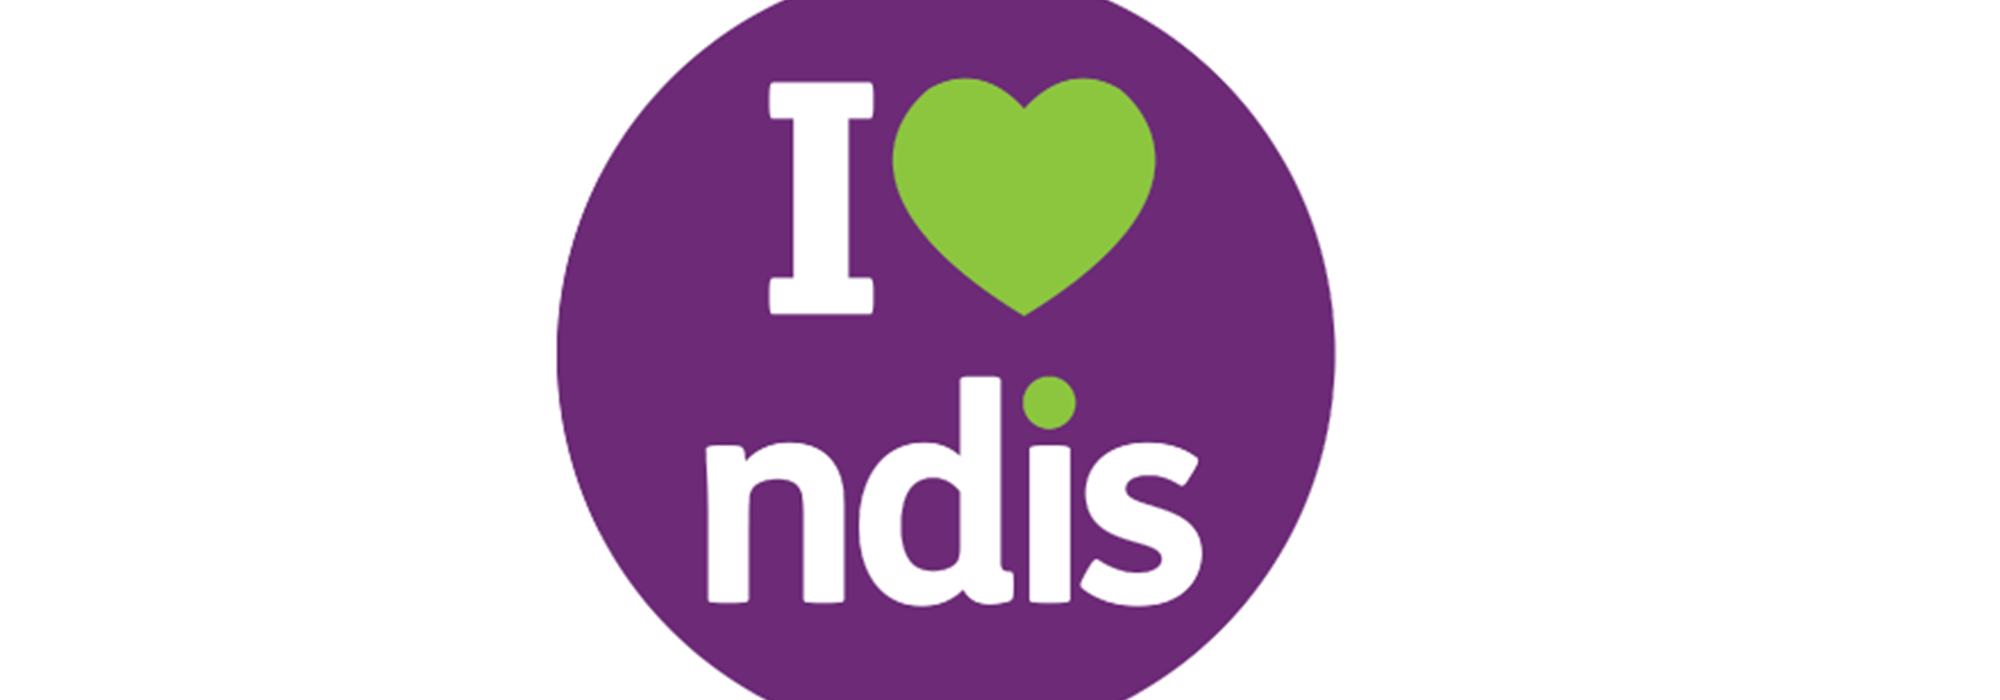 The ongoing NDIS Provider Registration debate